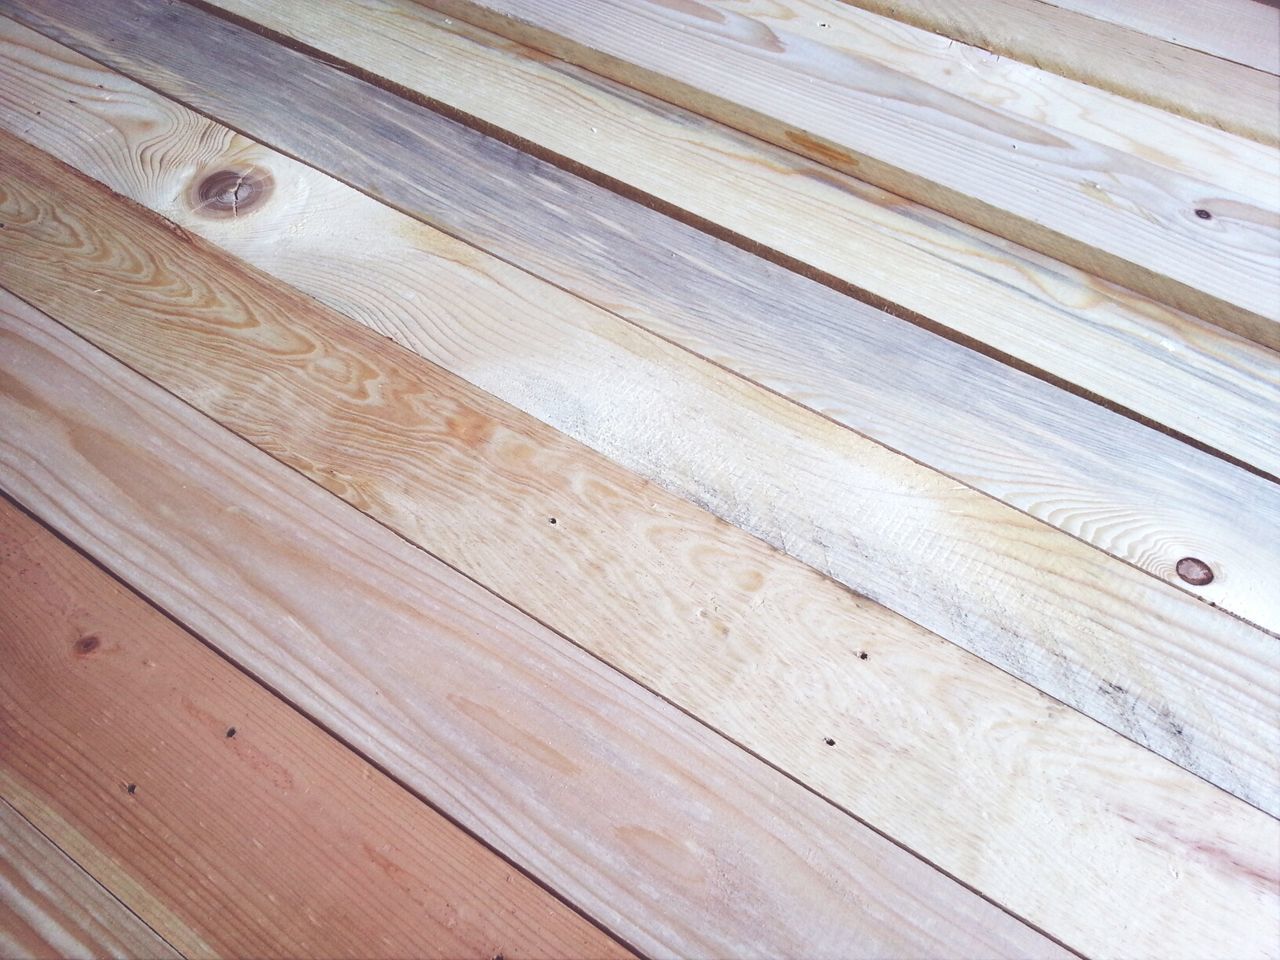 Close-up view of wooden floor